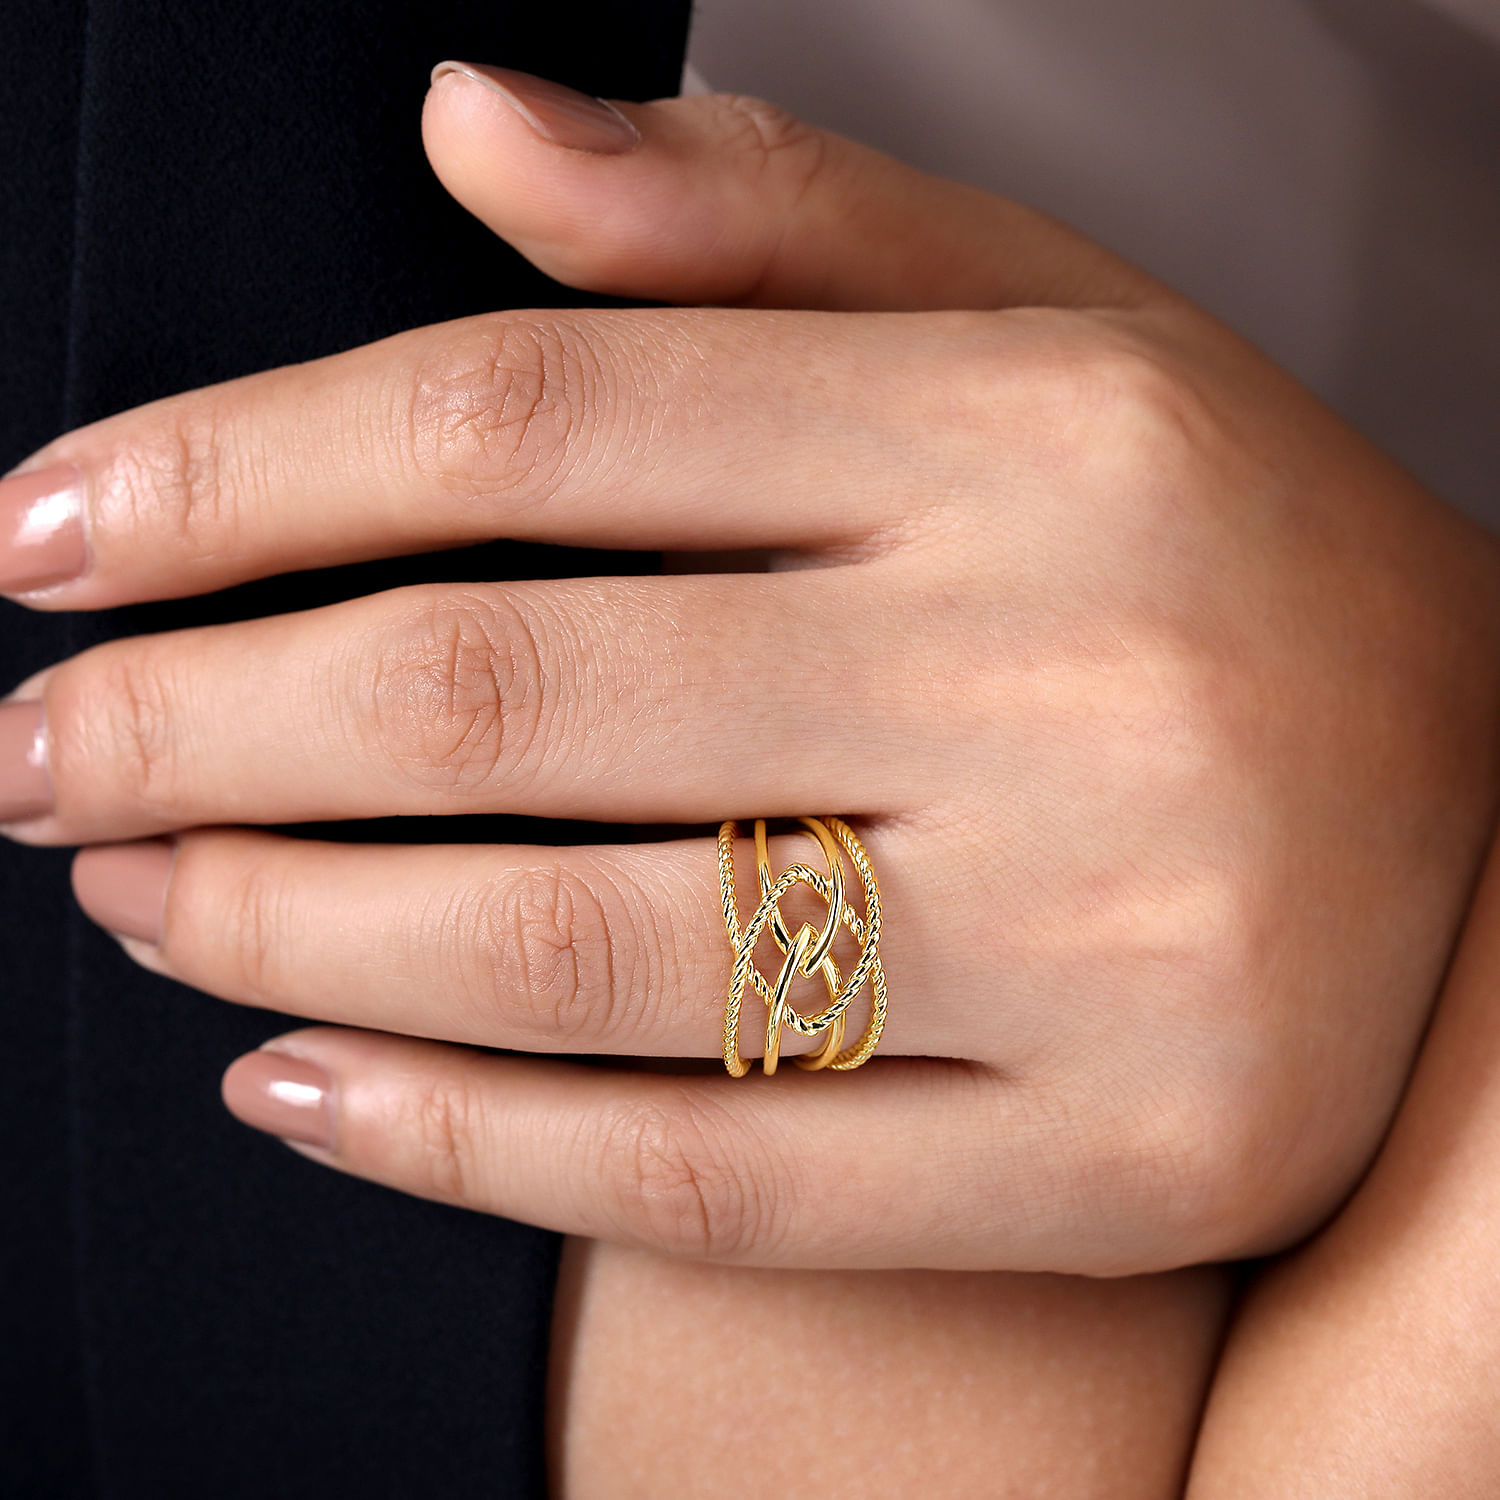 14K Yellow Gold Wide Intersecting Twisted Rope Ring